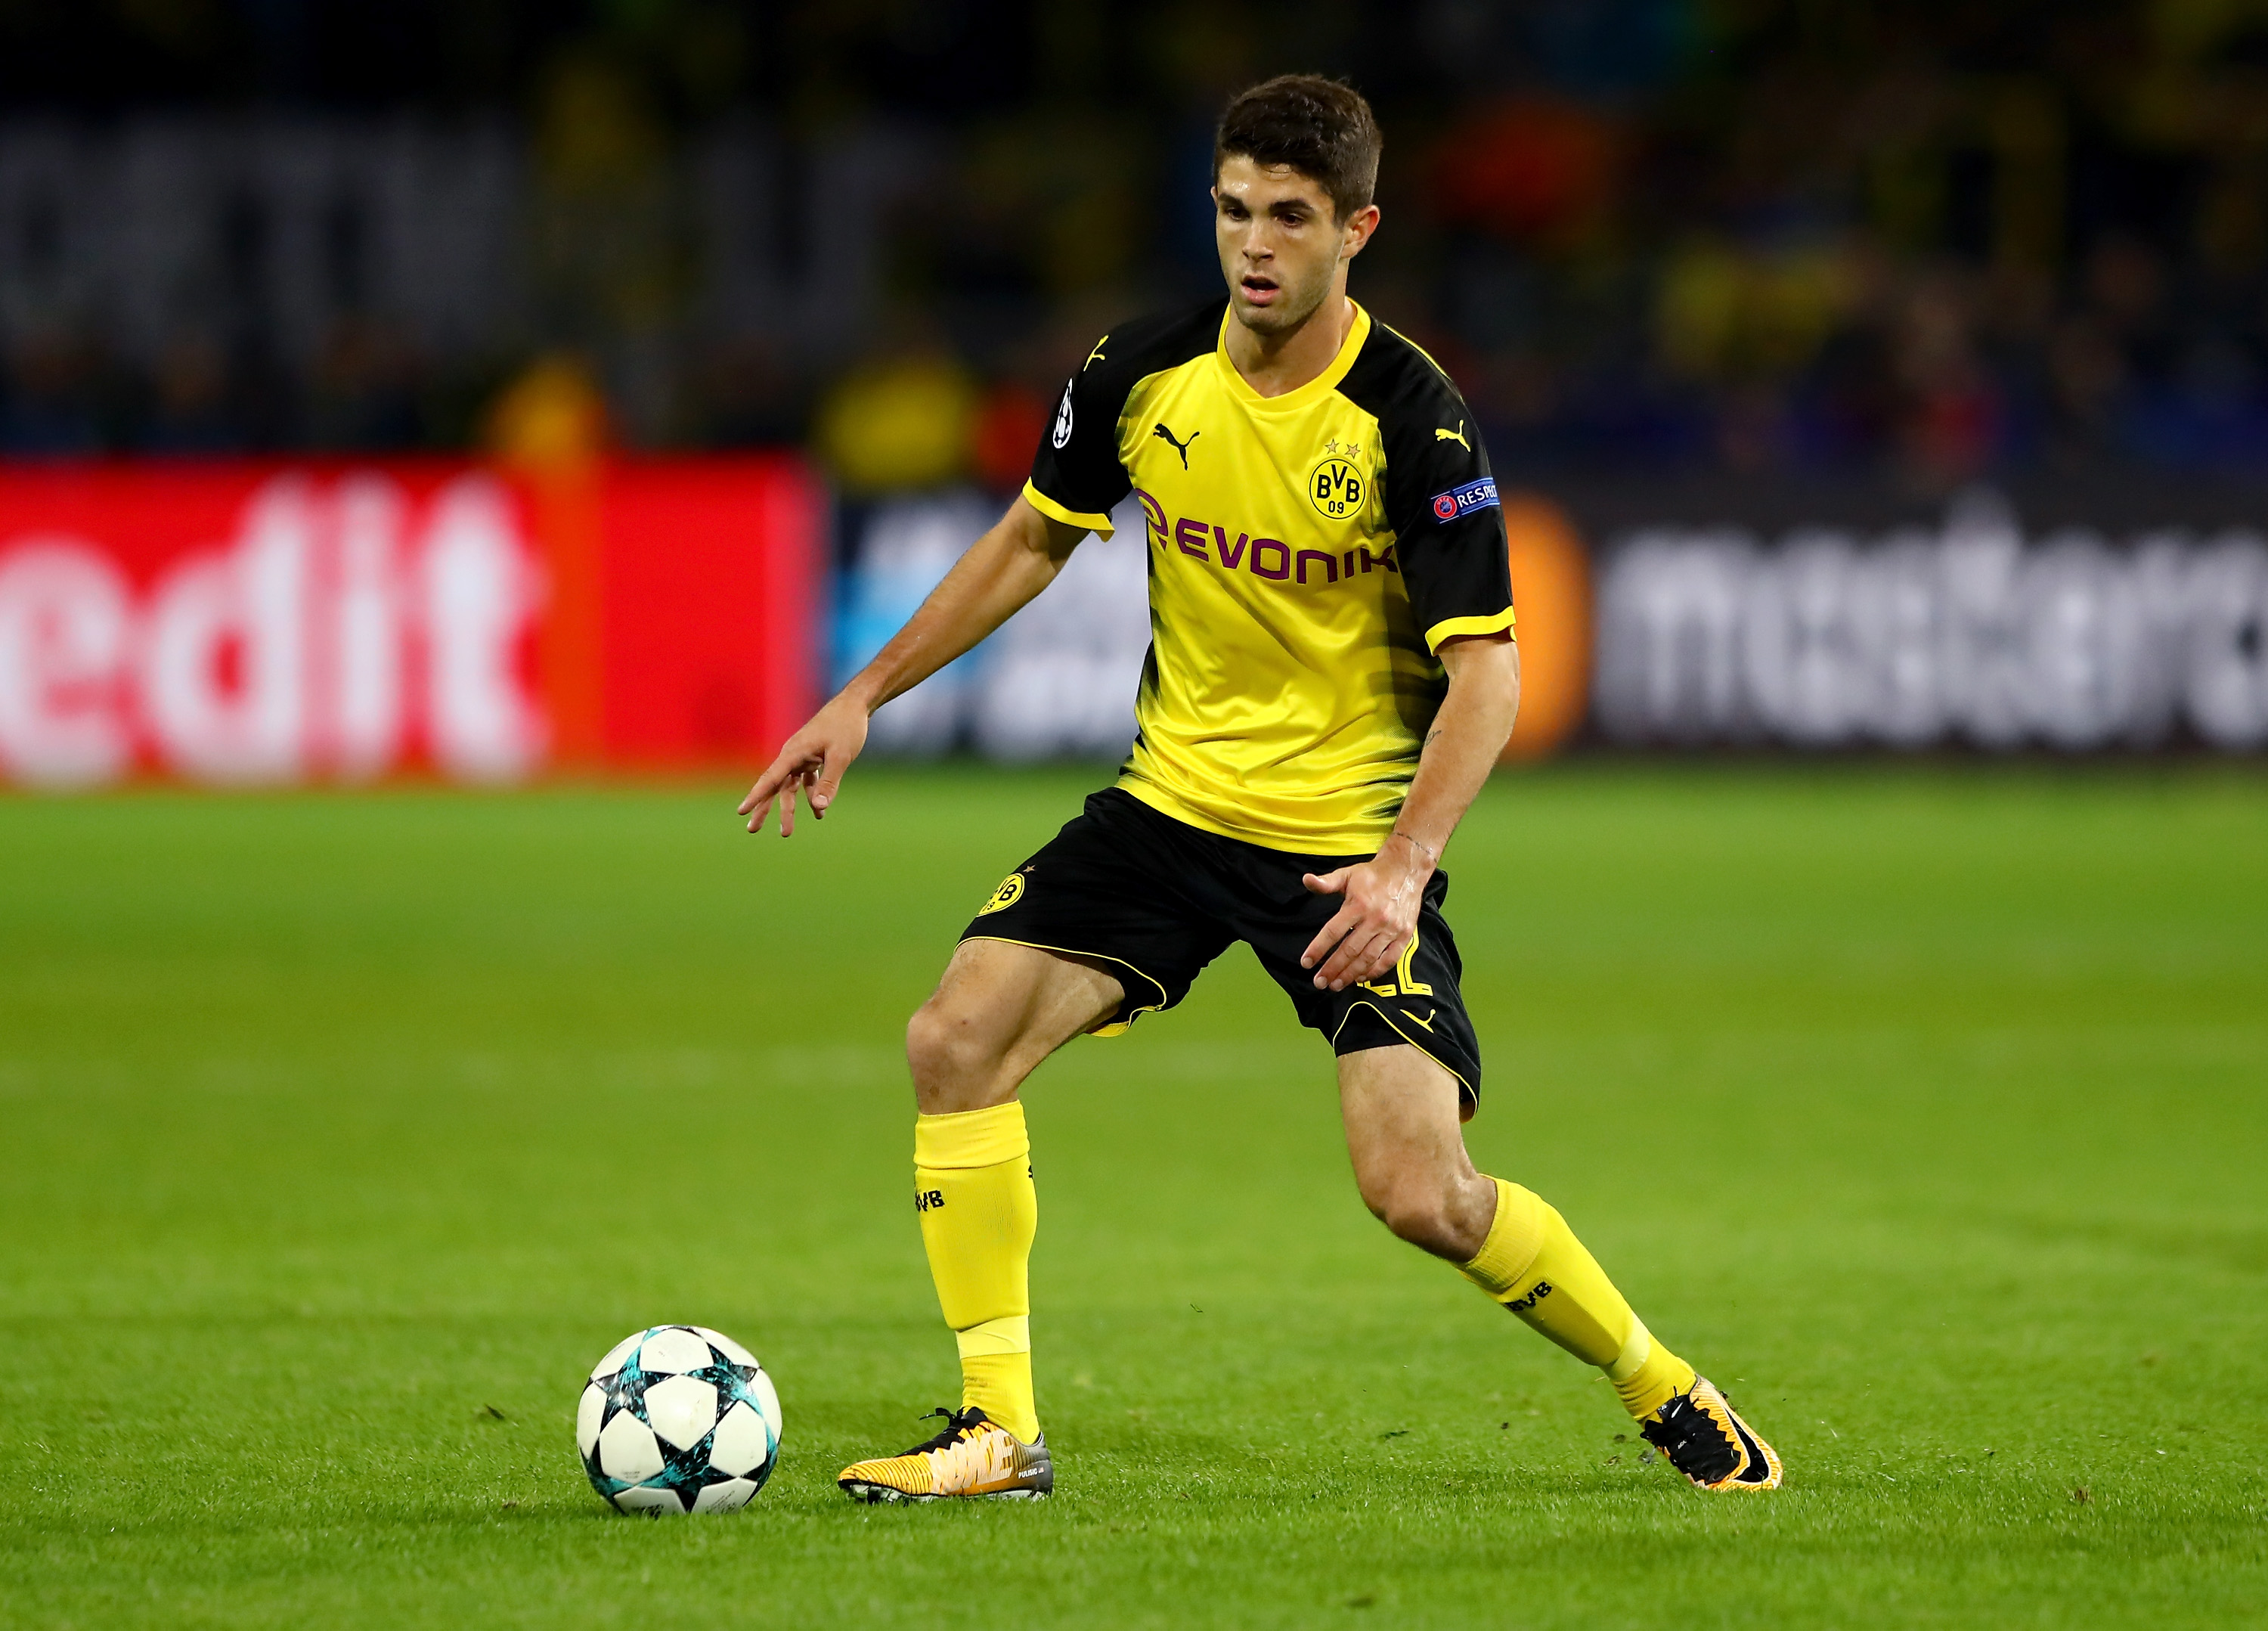 DORTMUND, GERMANY - SEPTEMBER 26:  Christian Pulisic of Dortmund runs with the ball the ball during the UEFA Champions League group H match between Borussia Dortmund and Real Madrid at Signal Iduna Park on September 26, 2017 in Dortmund, Germany.  (Photo by Martin Rose/Bongarts/Getty Images)